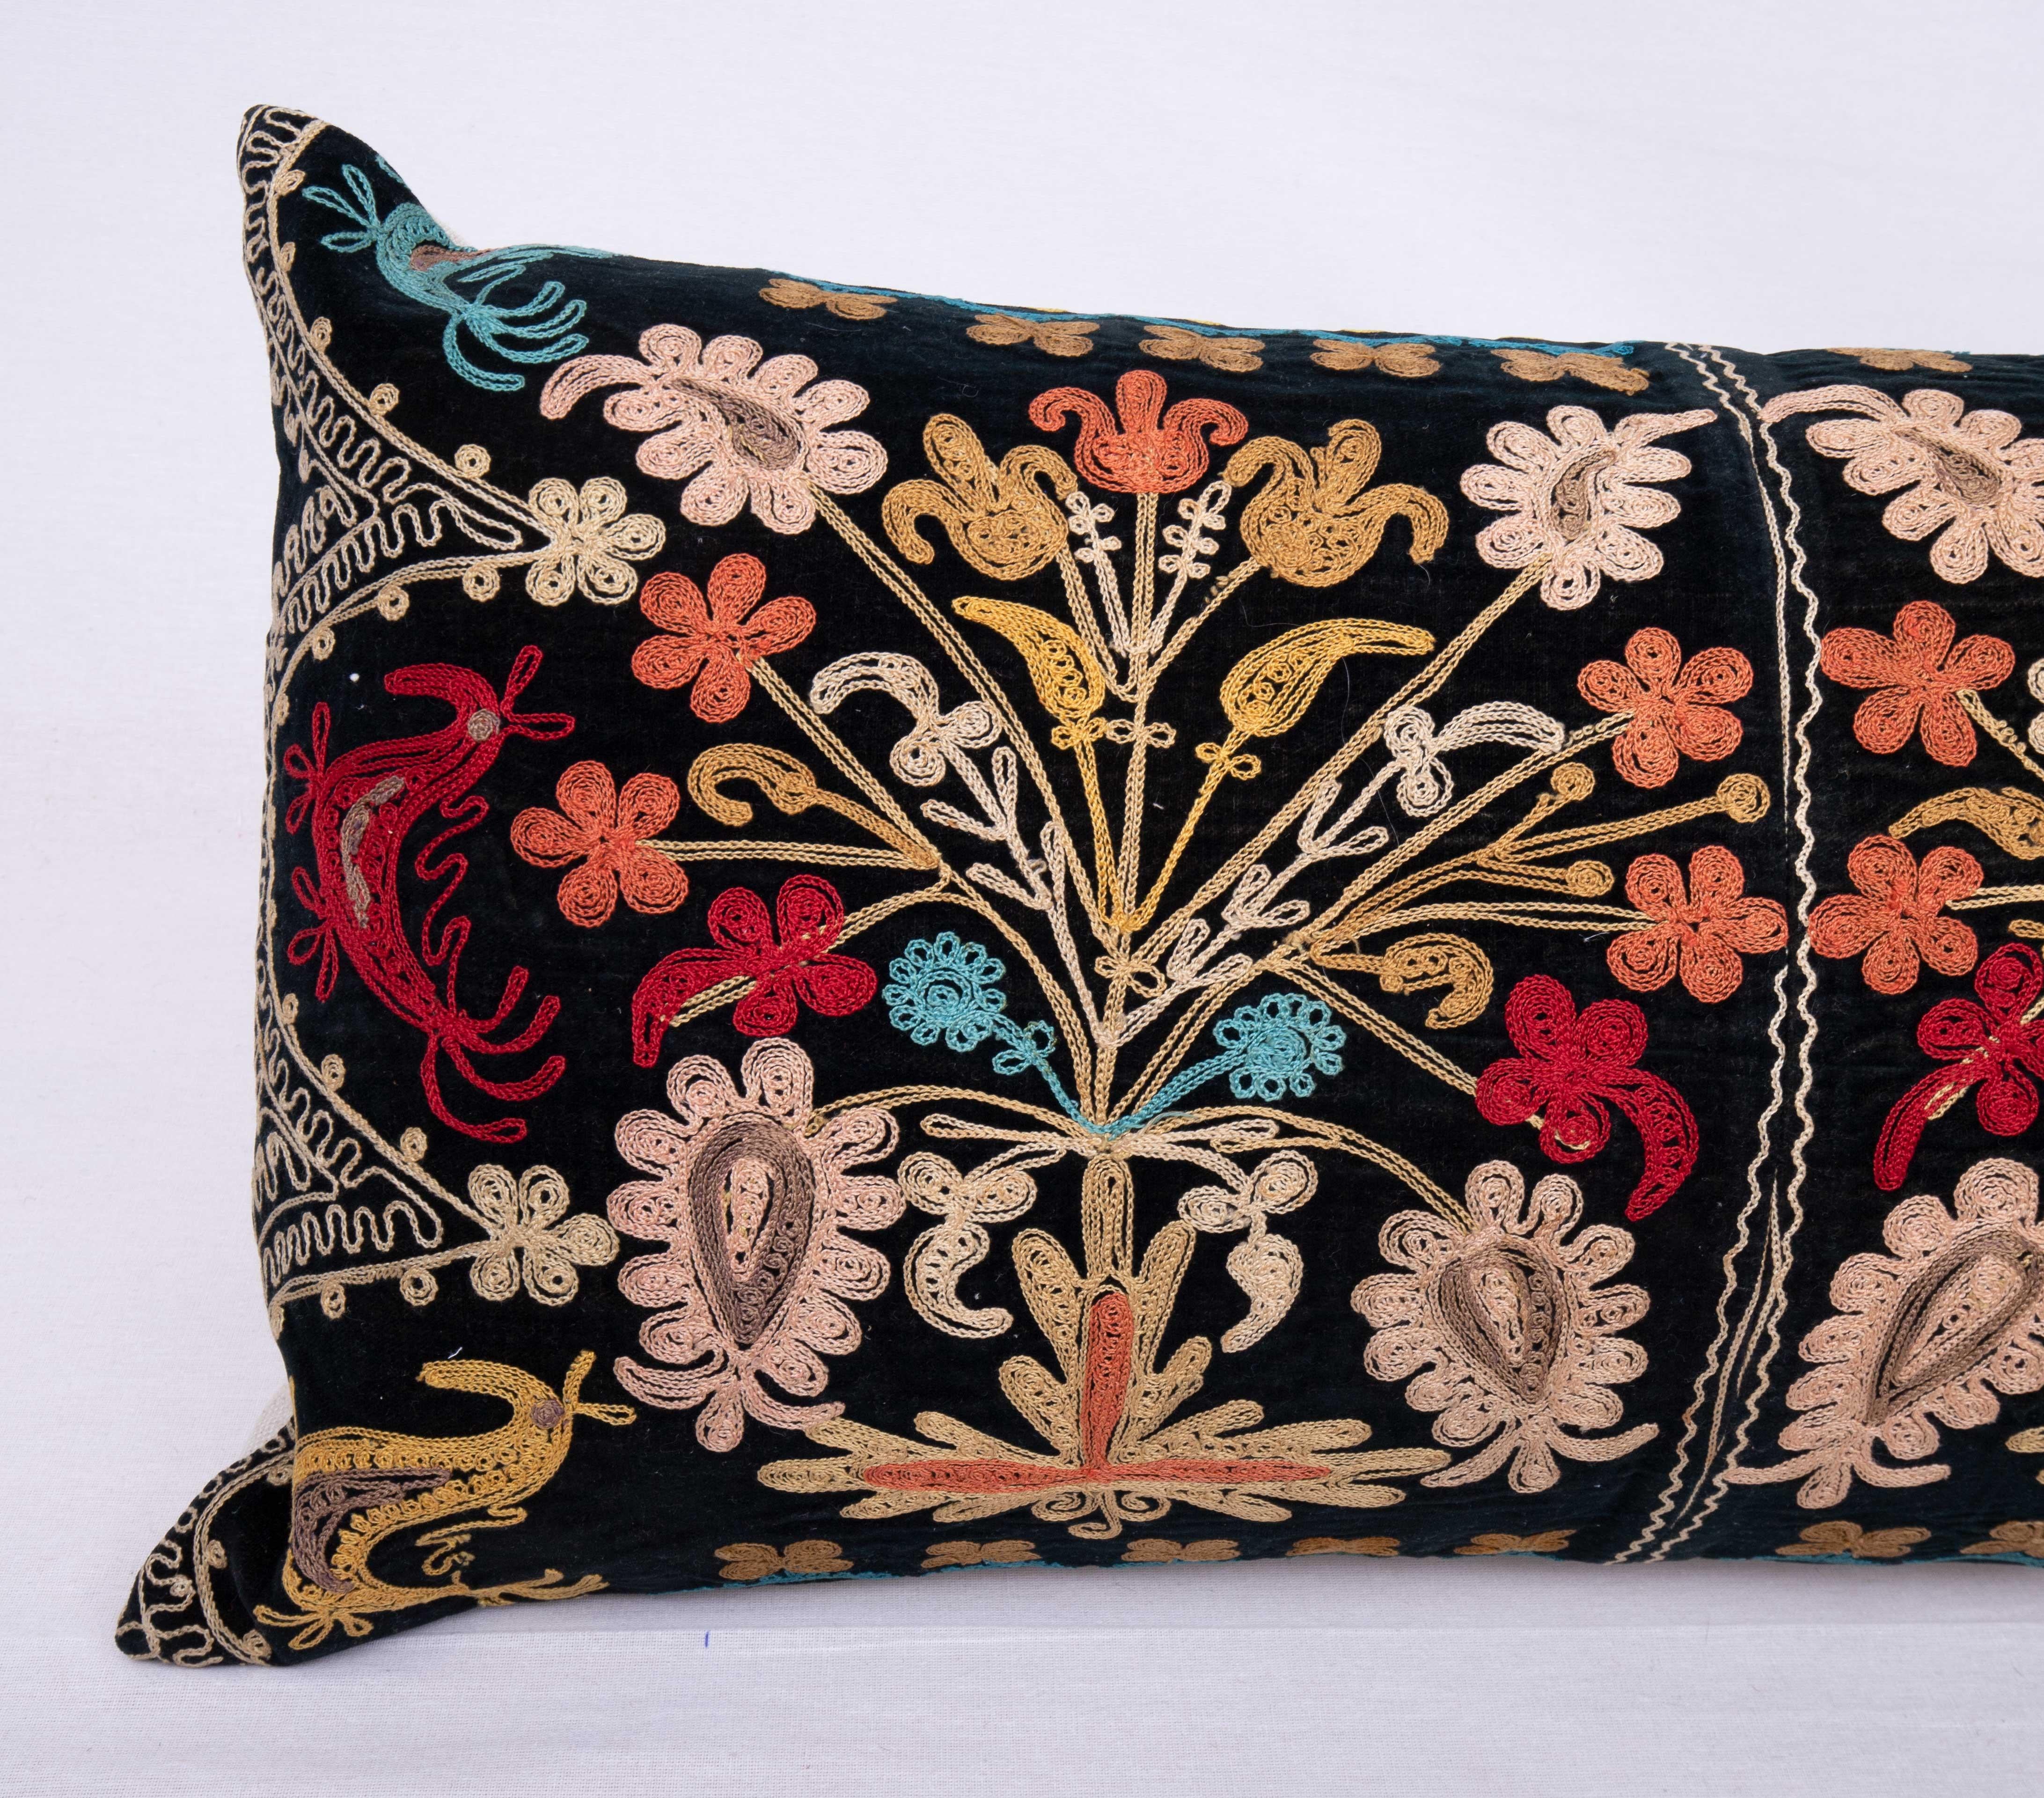 Uzbek Suzani Pillow Cover Made from a Vintage Velvet Suzani For Sale